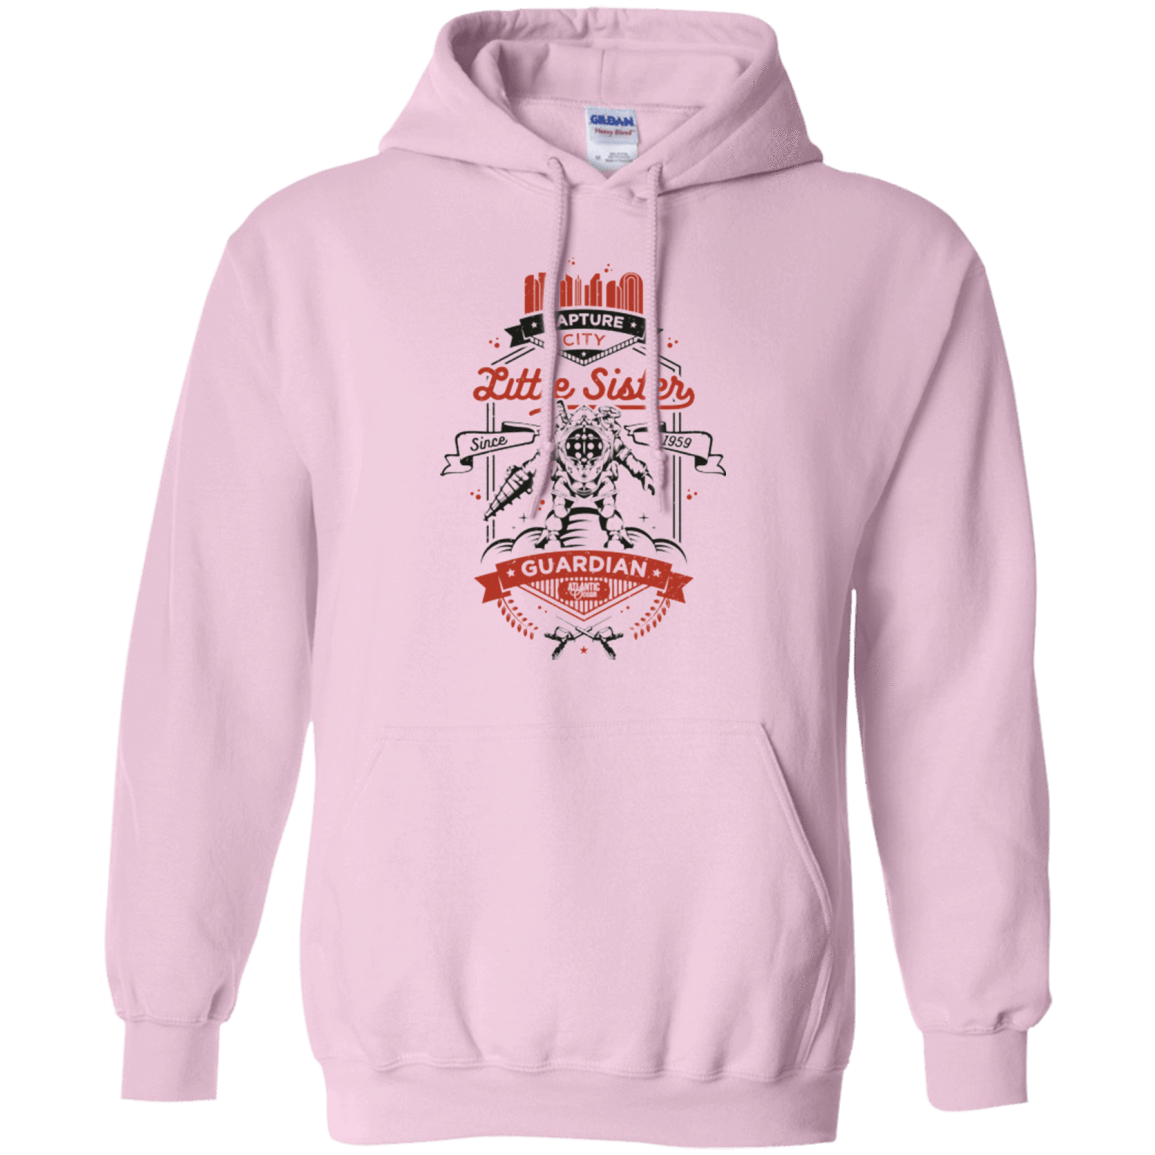 Sweatshirts Light Pink / Small Little Sister Protector V2 Pullover Hoodie